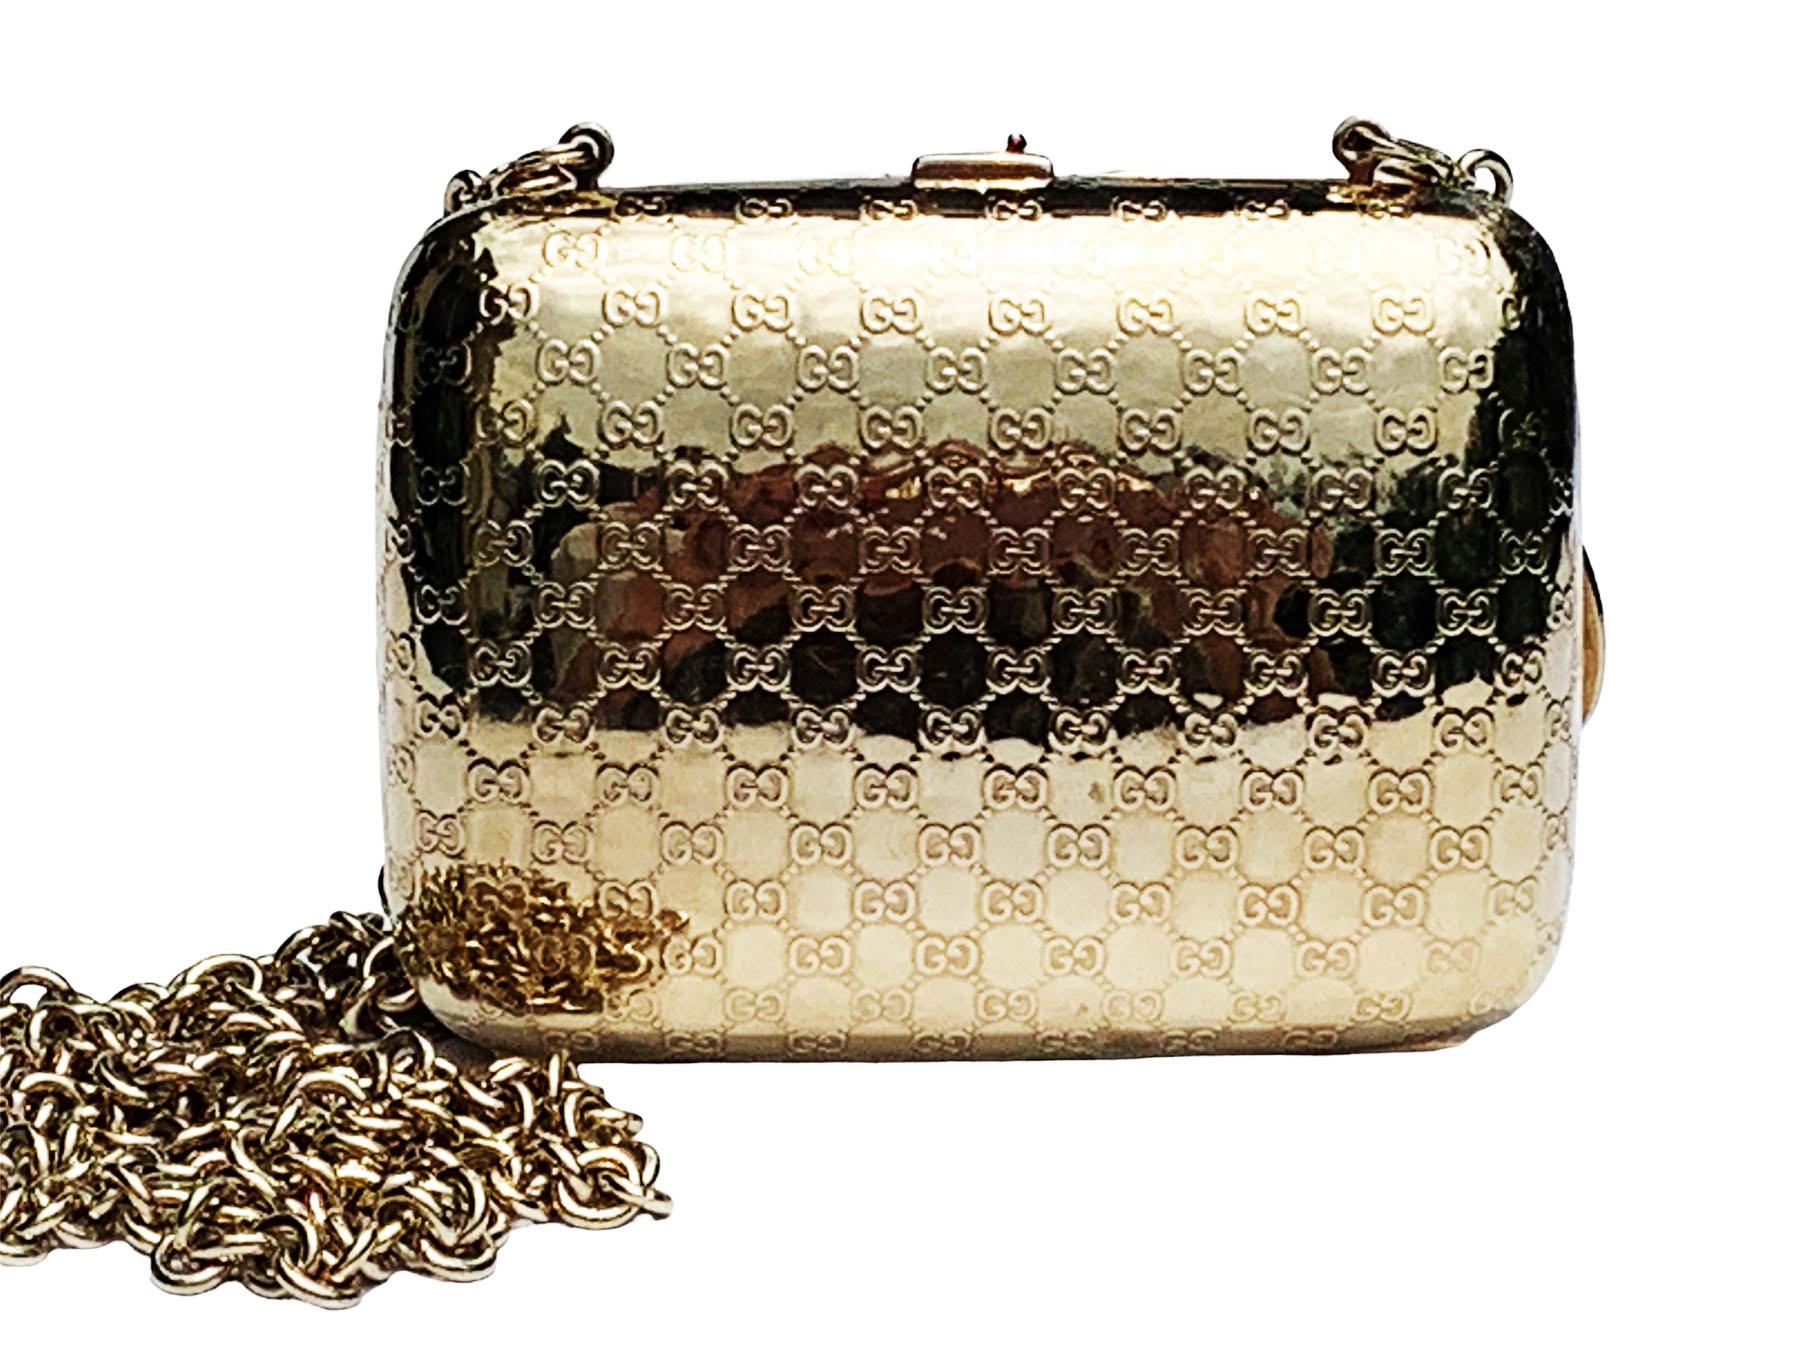 Tom Ford for Gucci Gold Minaudiere in Micro Guccissima Embossed Gold tone Metal and Enamel
2000